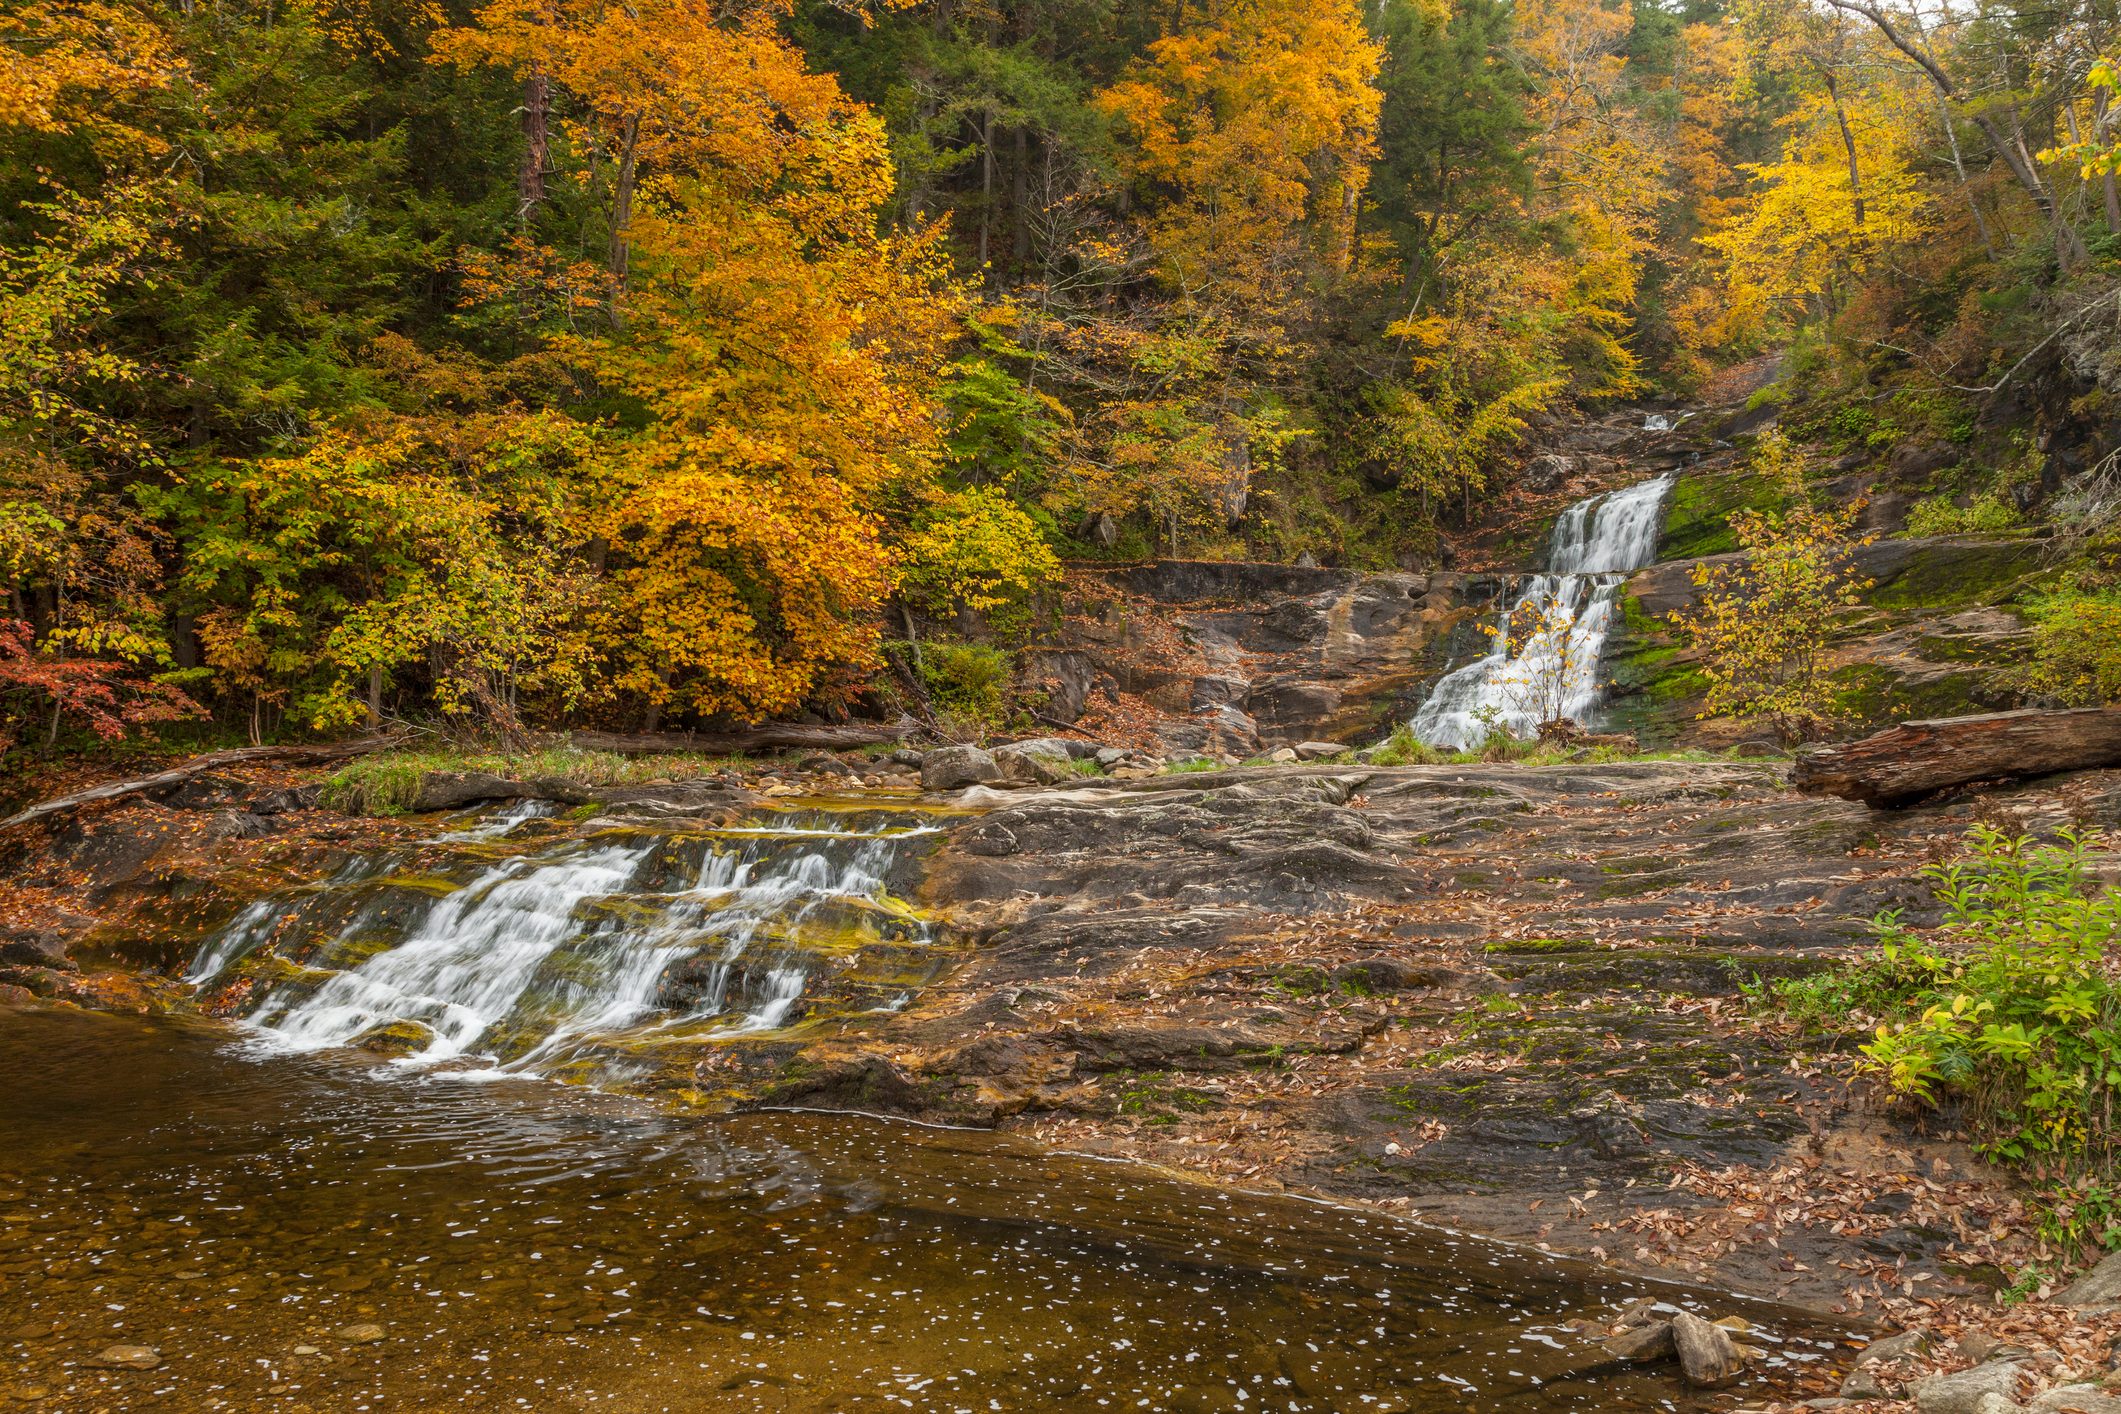 Waterfalls and autumn tree colors